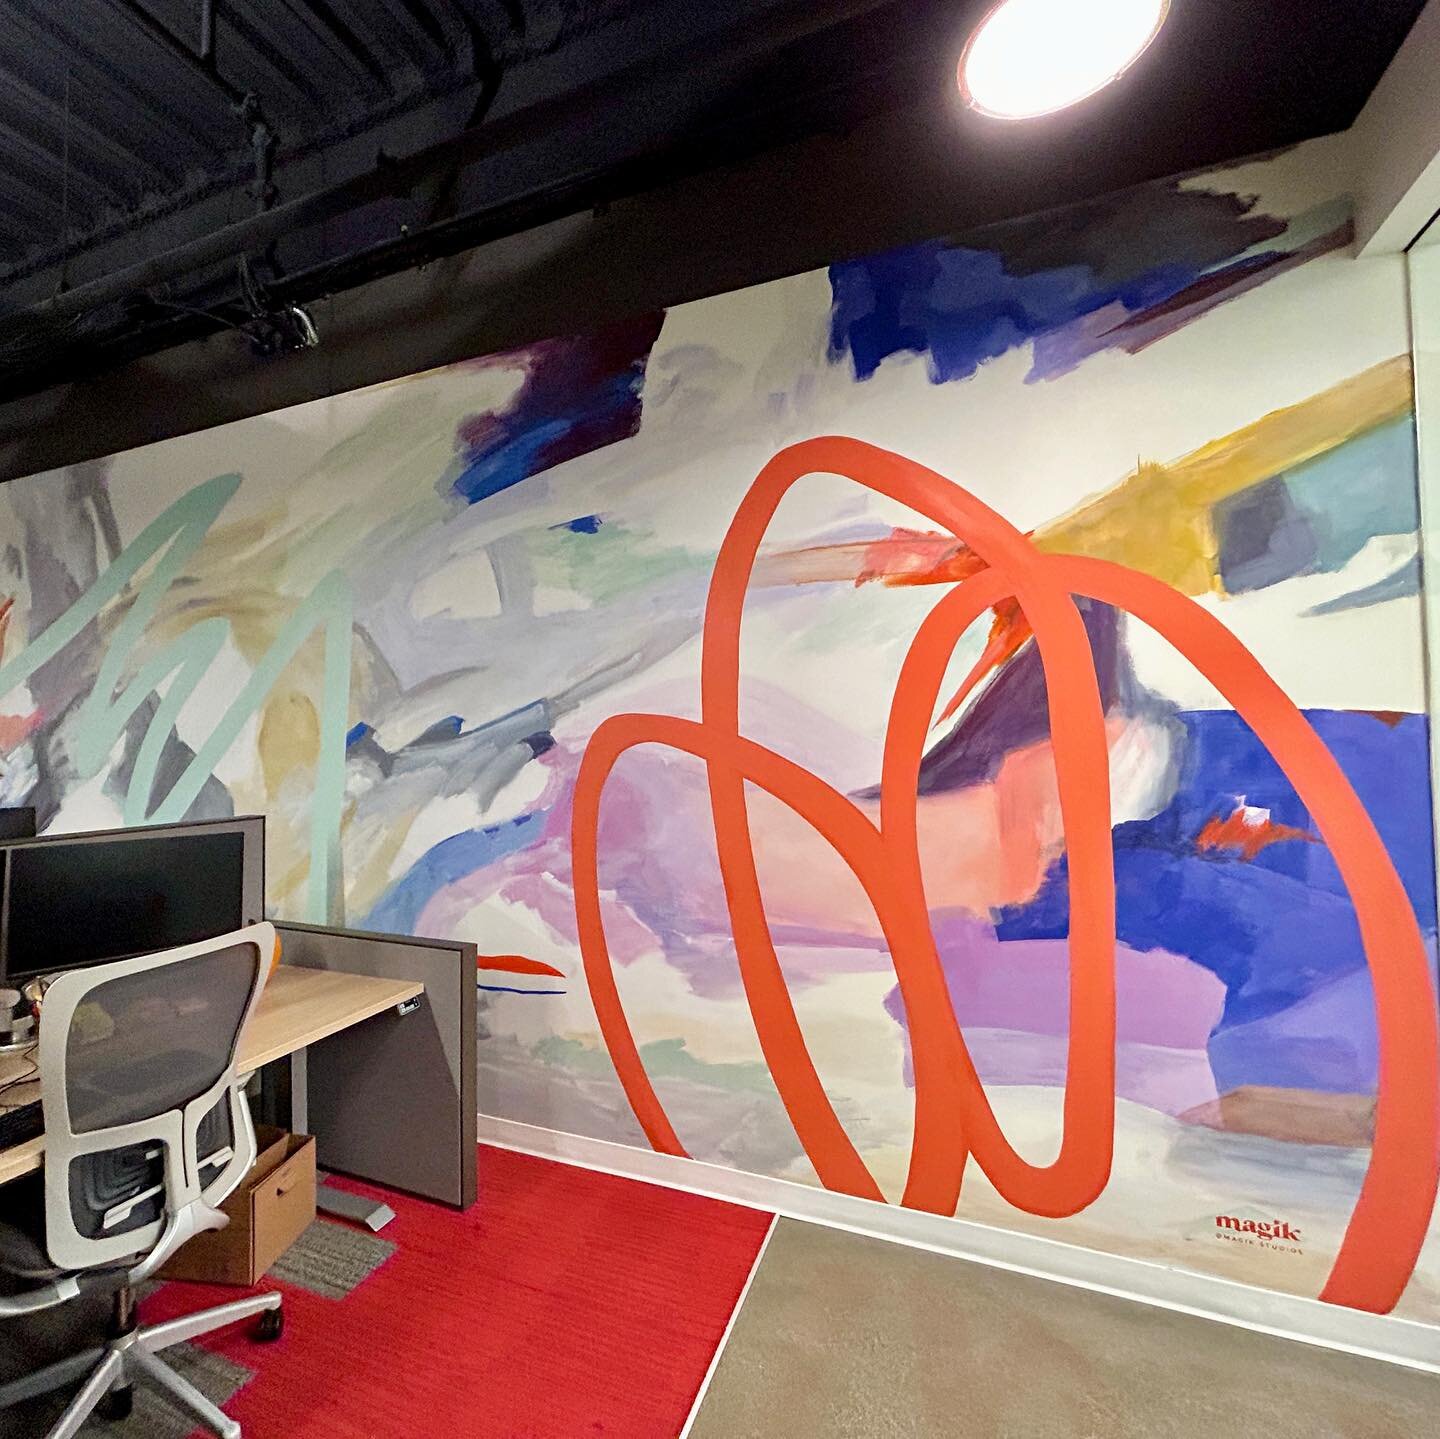 &ldquo;Burst&rdquo; &mdash; an abstract mural representing energy flow throughout the creative process. If you could draw a brainstorm, we think it would look like this 🧠 🌈💡

Wall 👆of ✌️ at McWhinney&rsquo;s @dairyblock office